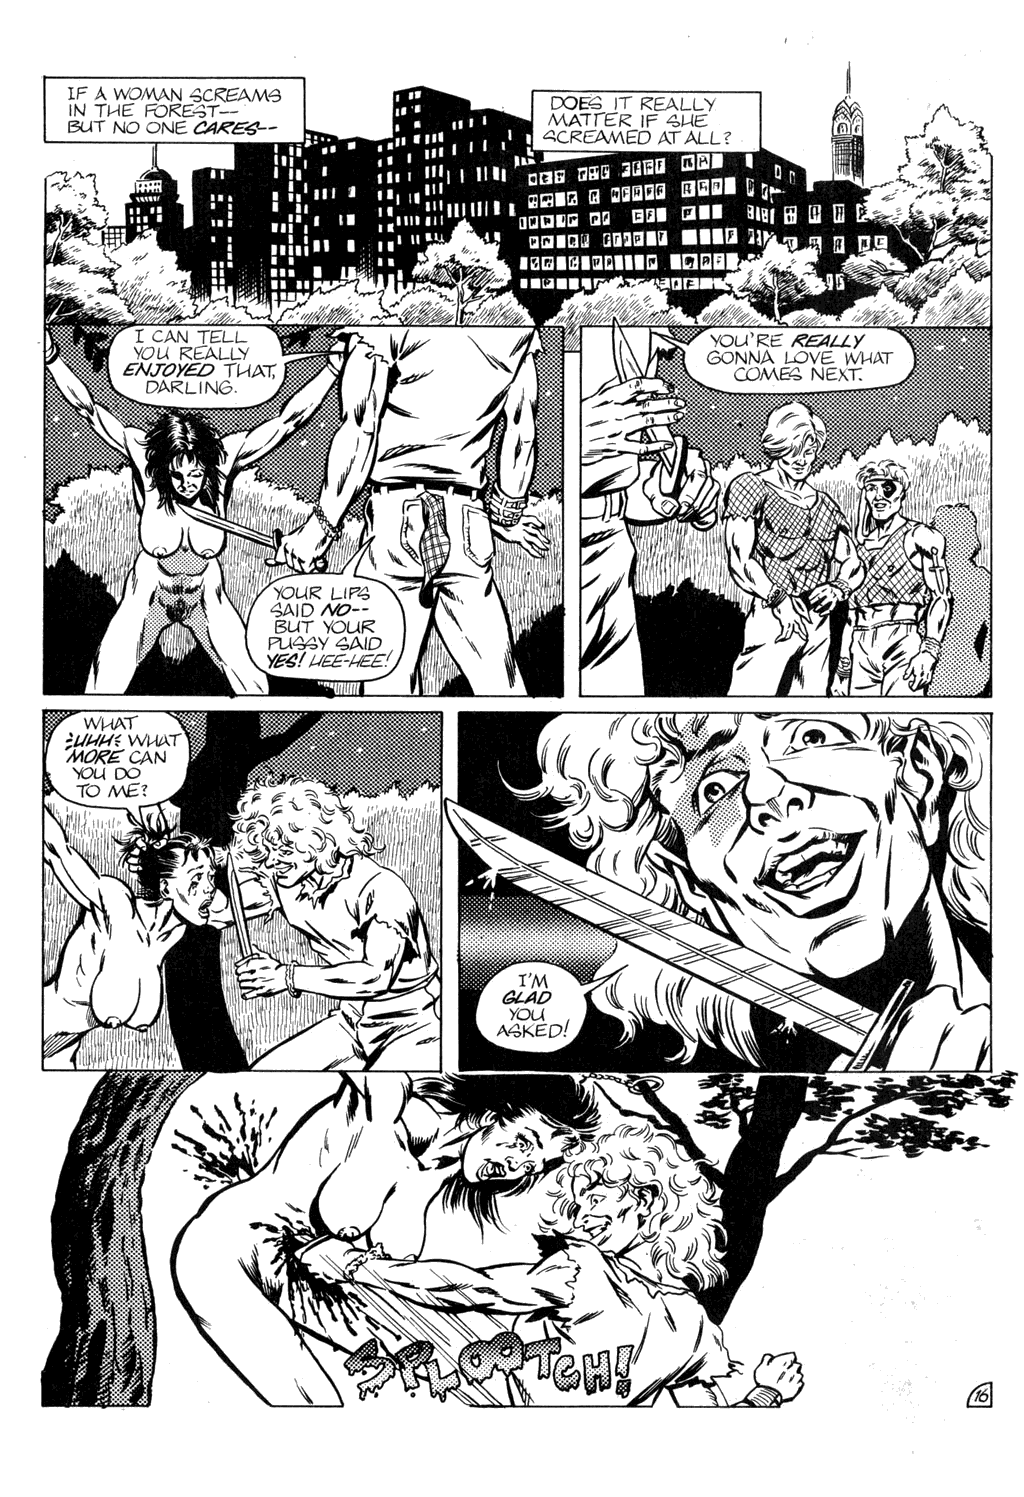 Scimidar Book IV: Wild Thing issue 1 - Page 17